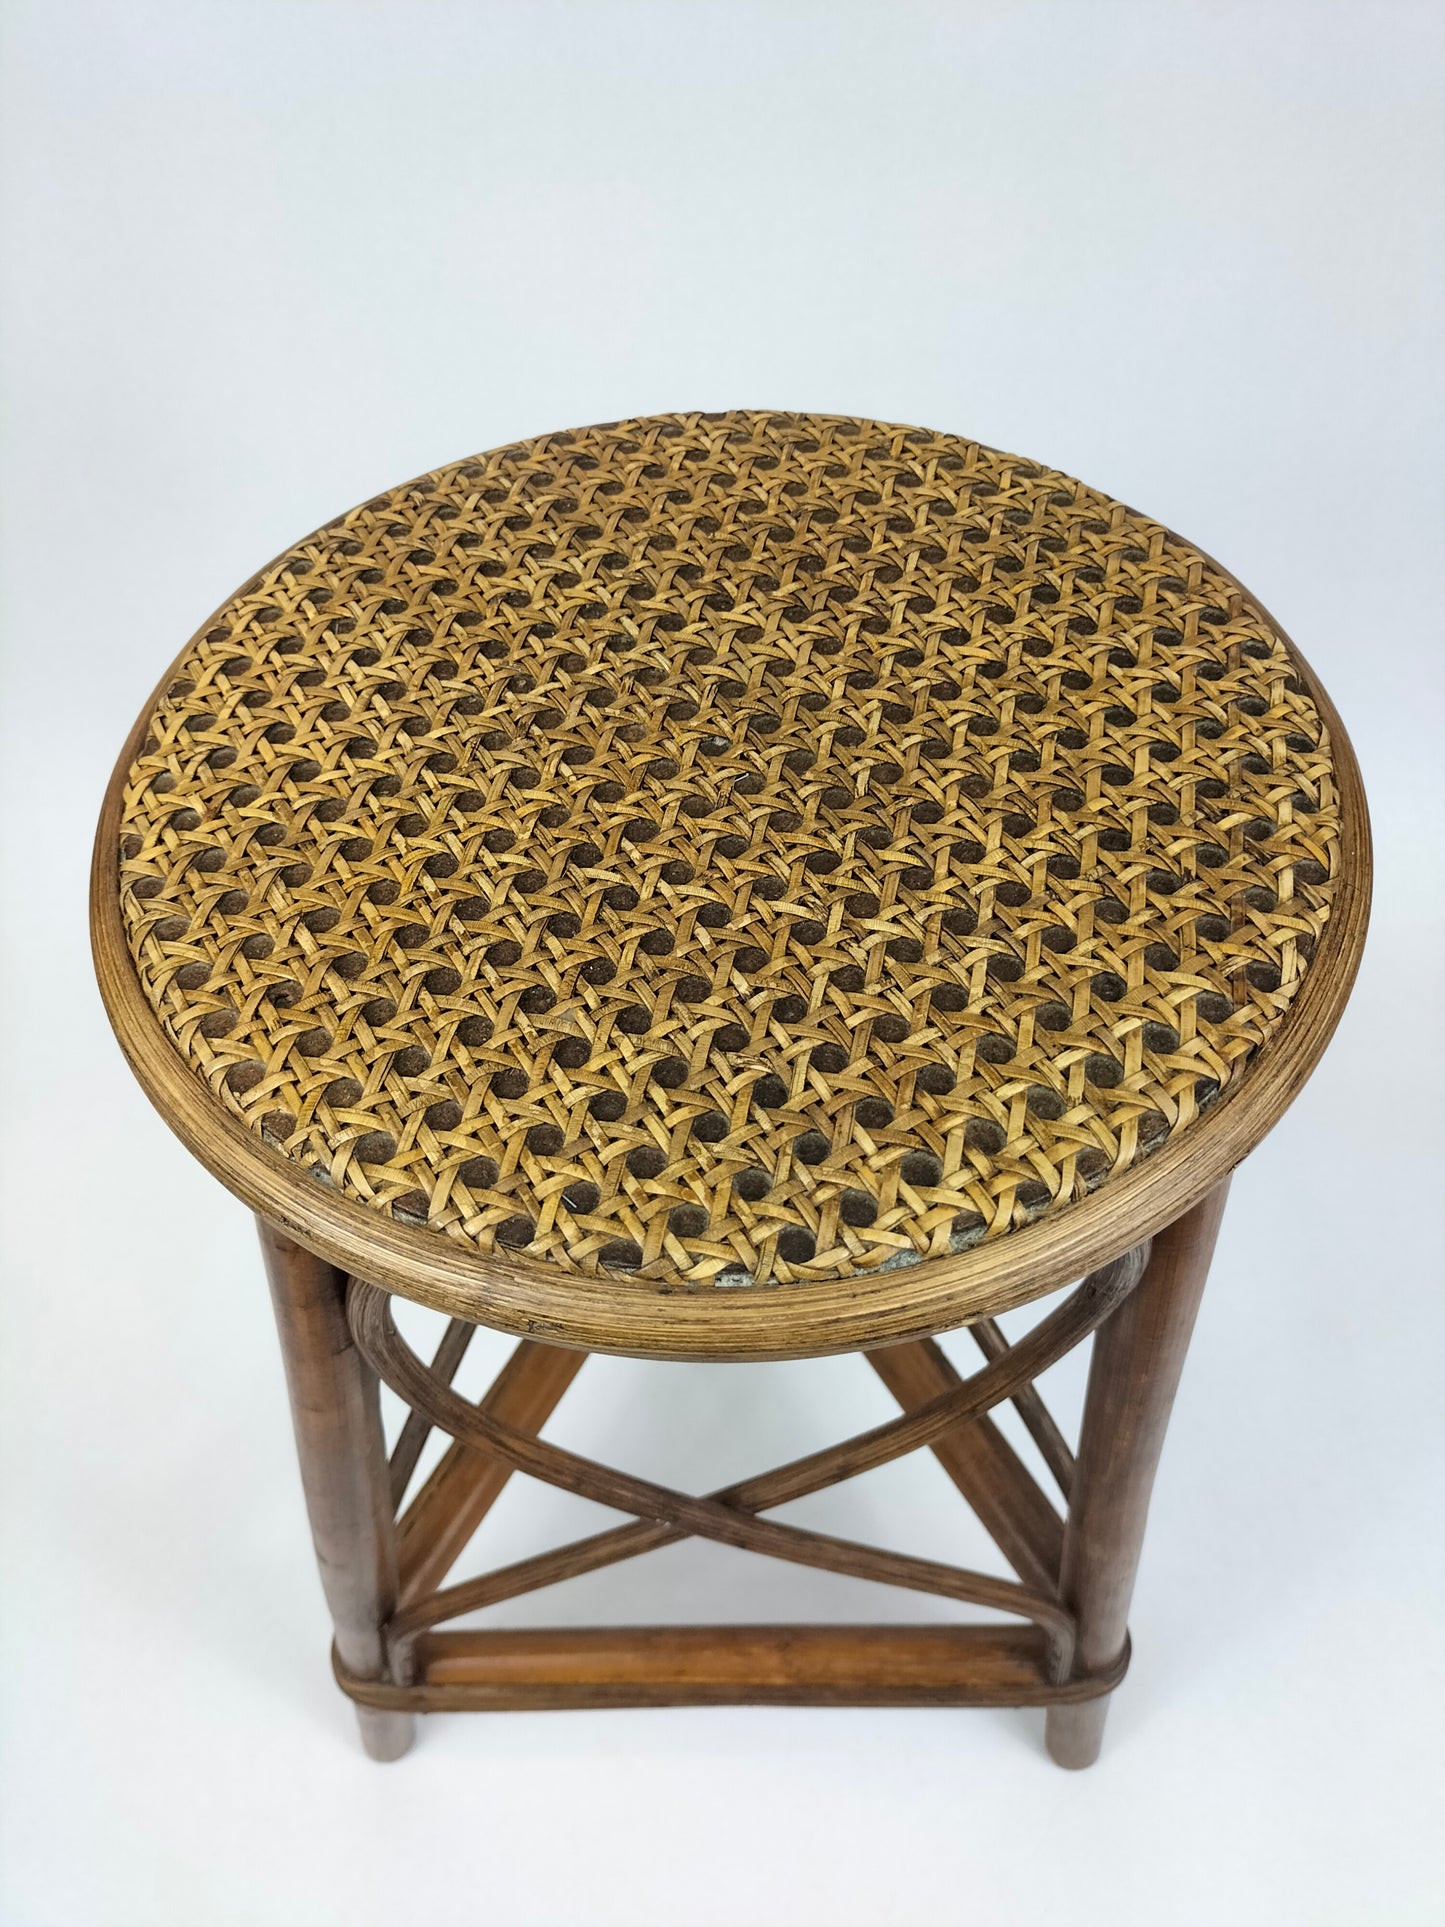 Vintage rattan plant table with woven top // Belgium - Mid 20th century